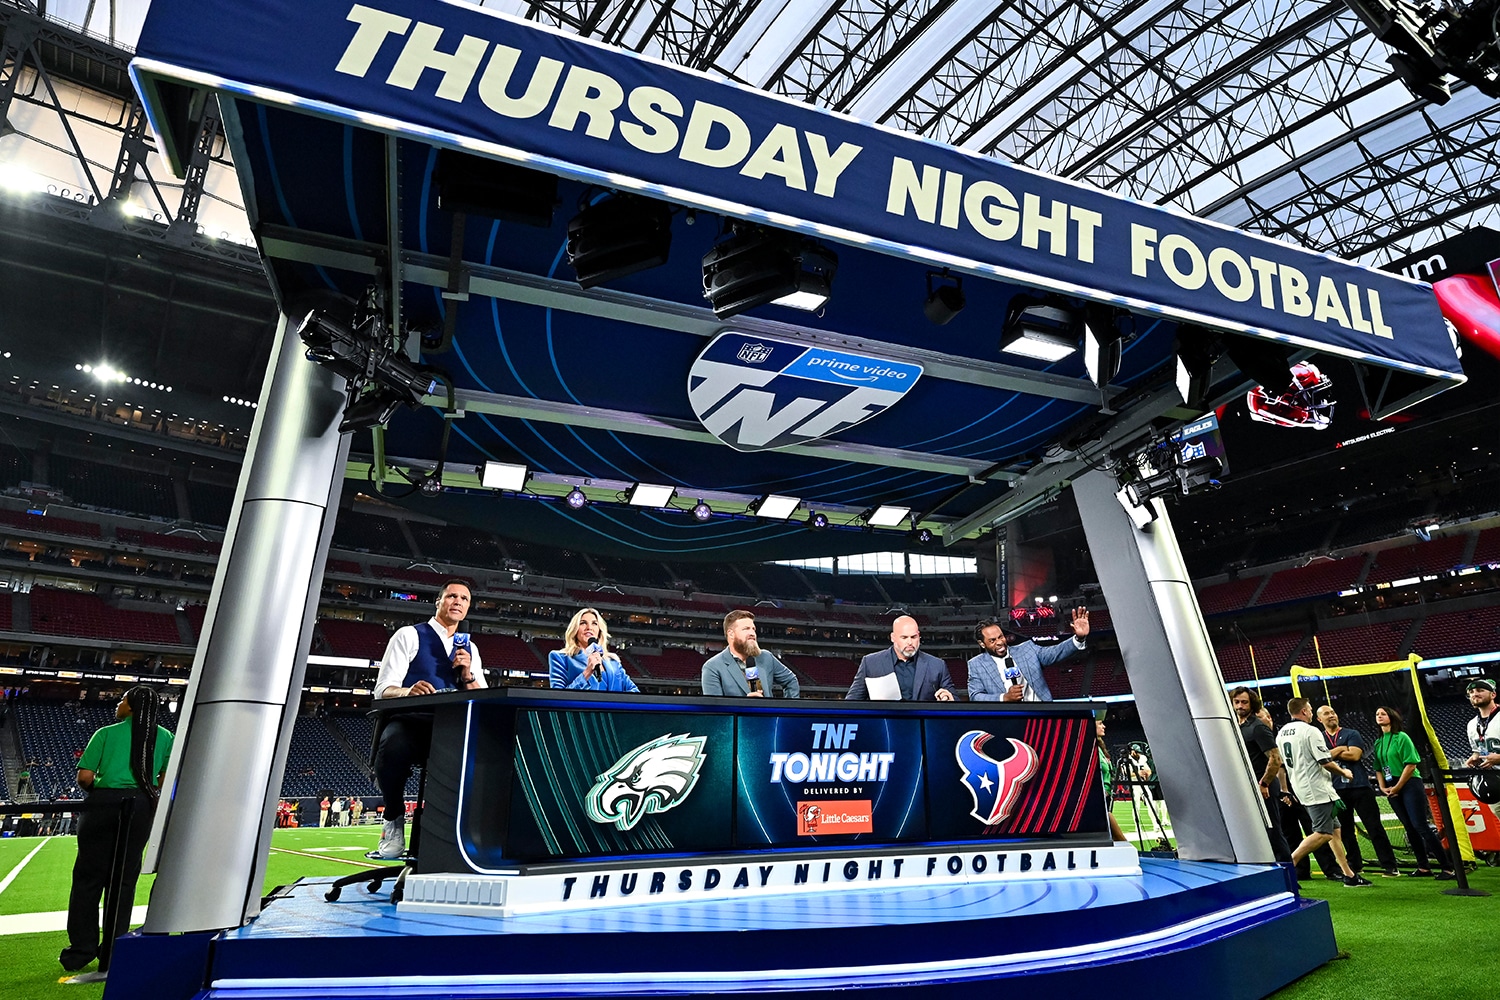 Thursday Night Football flex scheduling among new rule changes